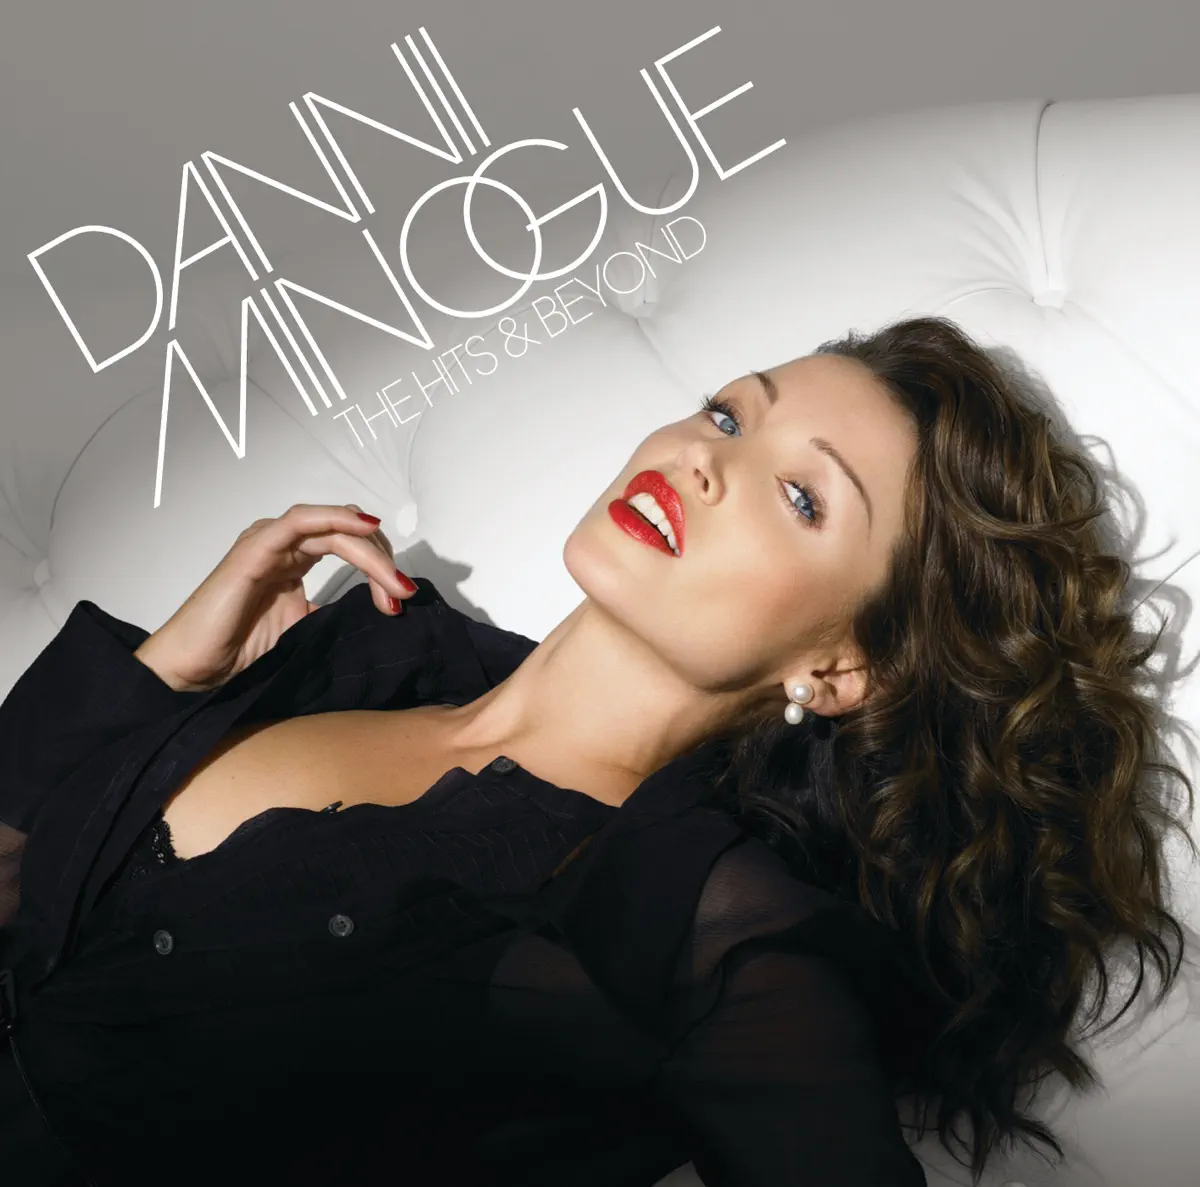 Dannii Minogue - The Hits and Beyond (2006) [iTunes Plus AAC M4A]-新房子